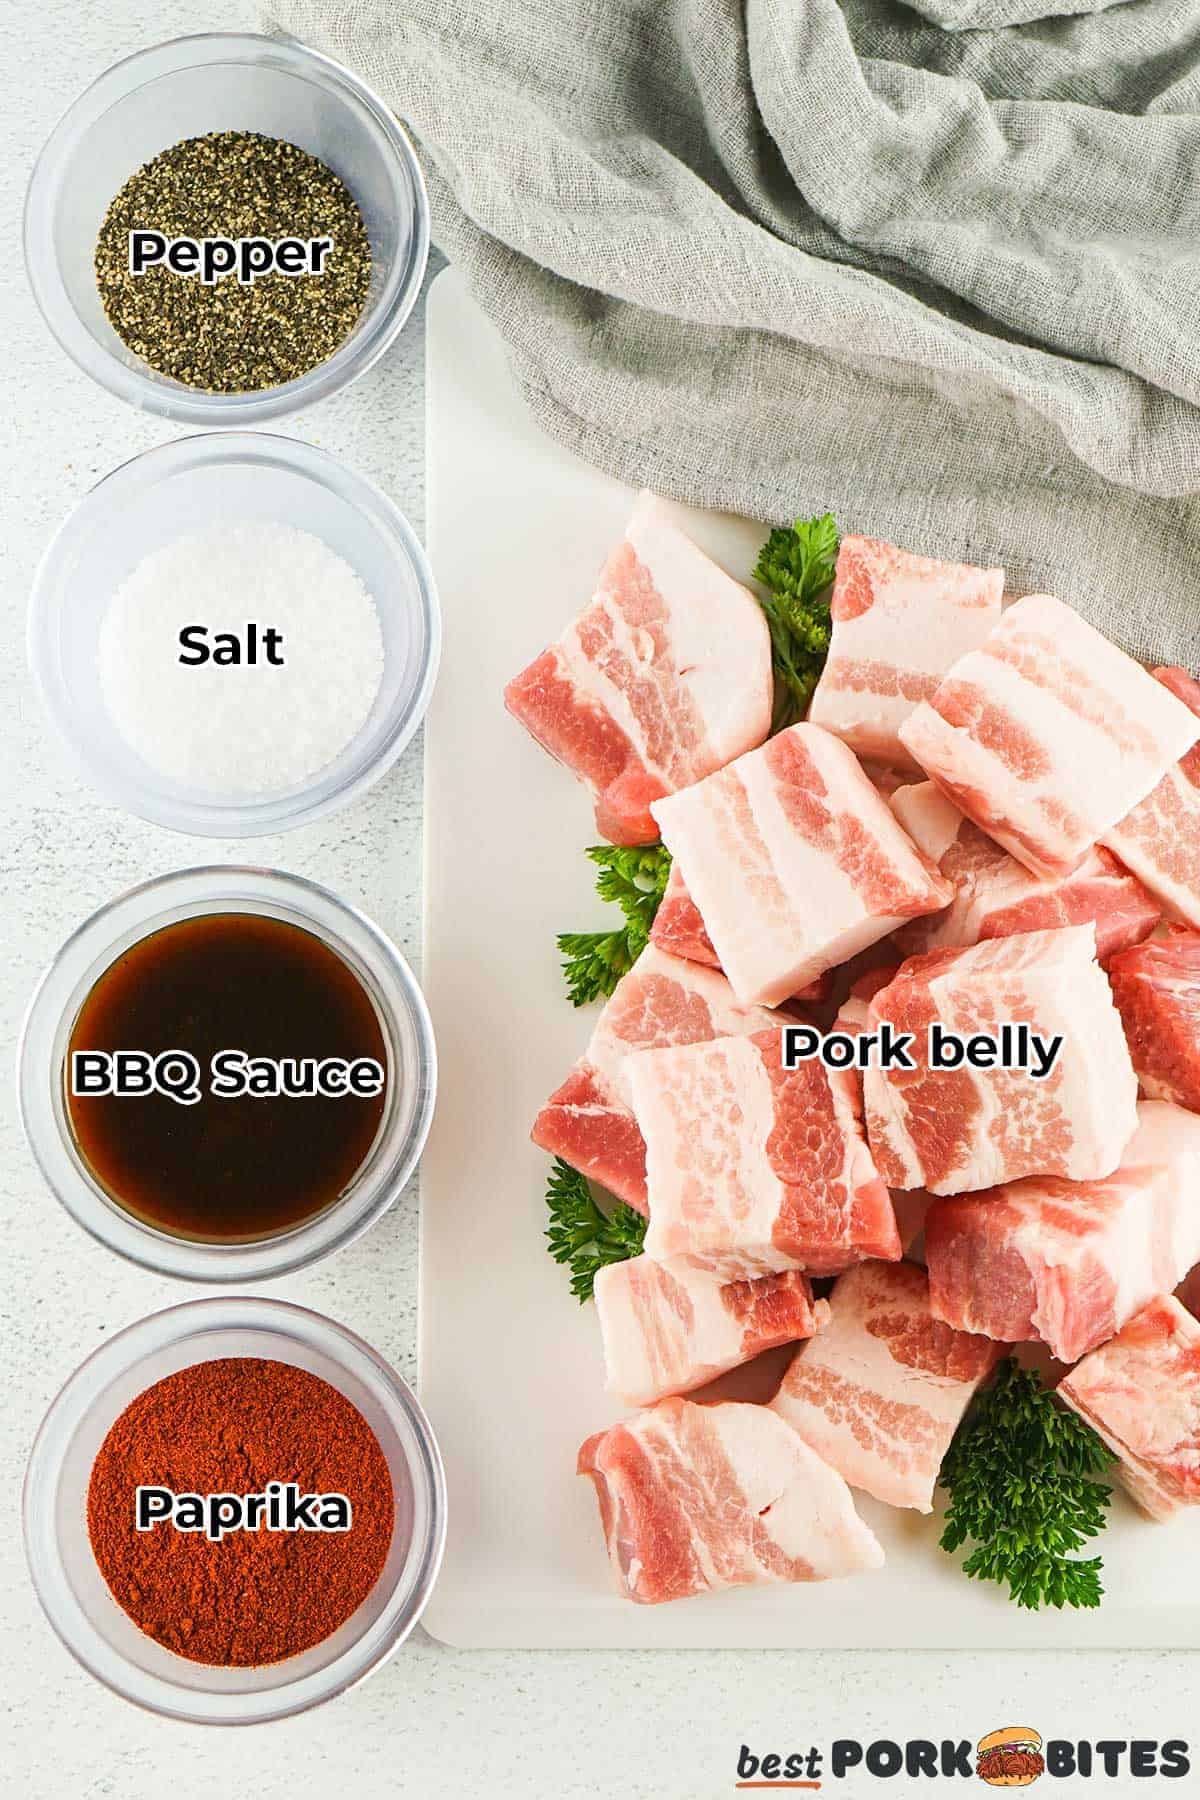 the ingredients for pork belly rub with labels